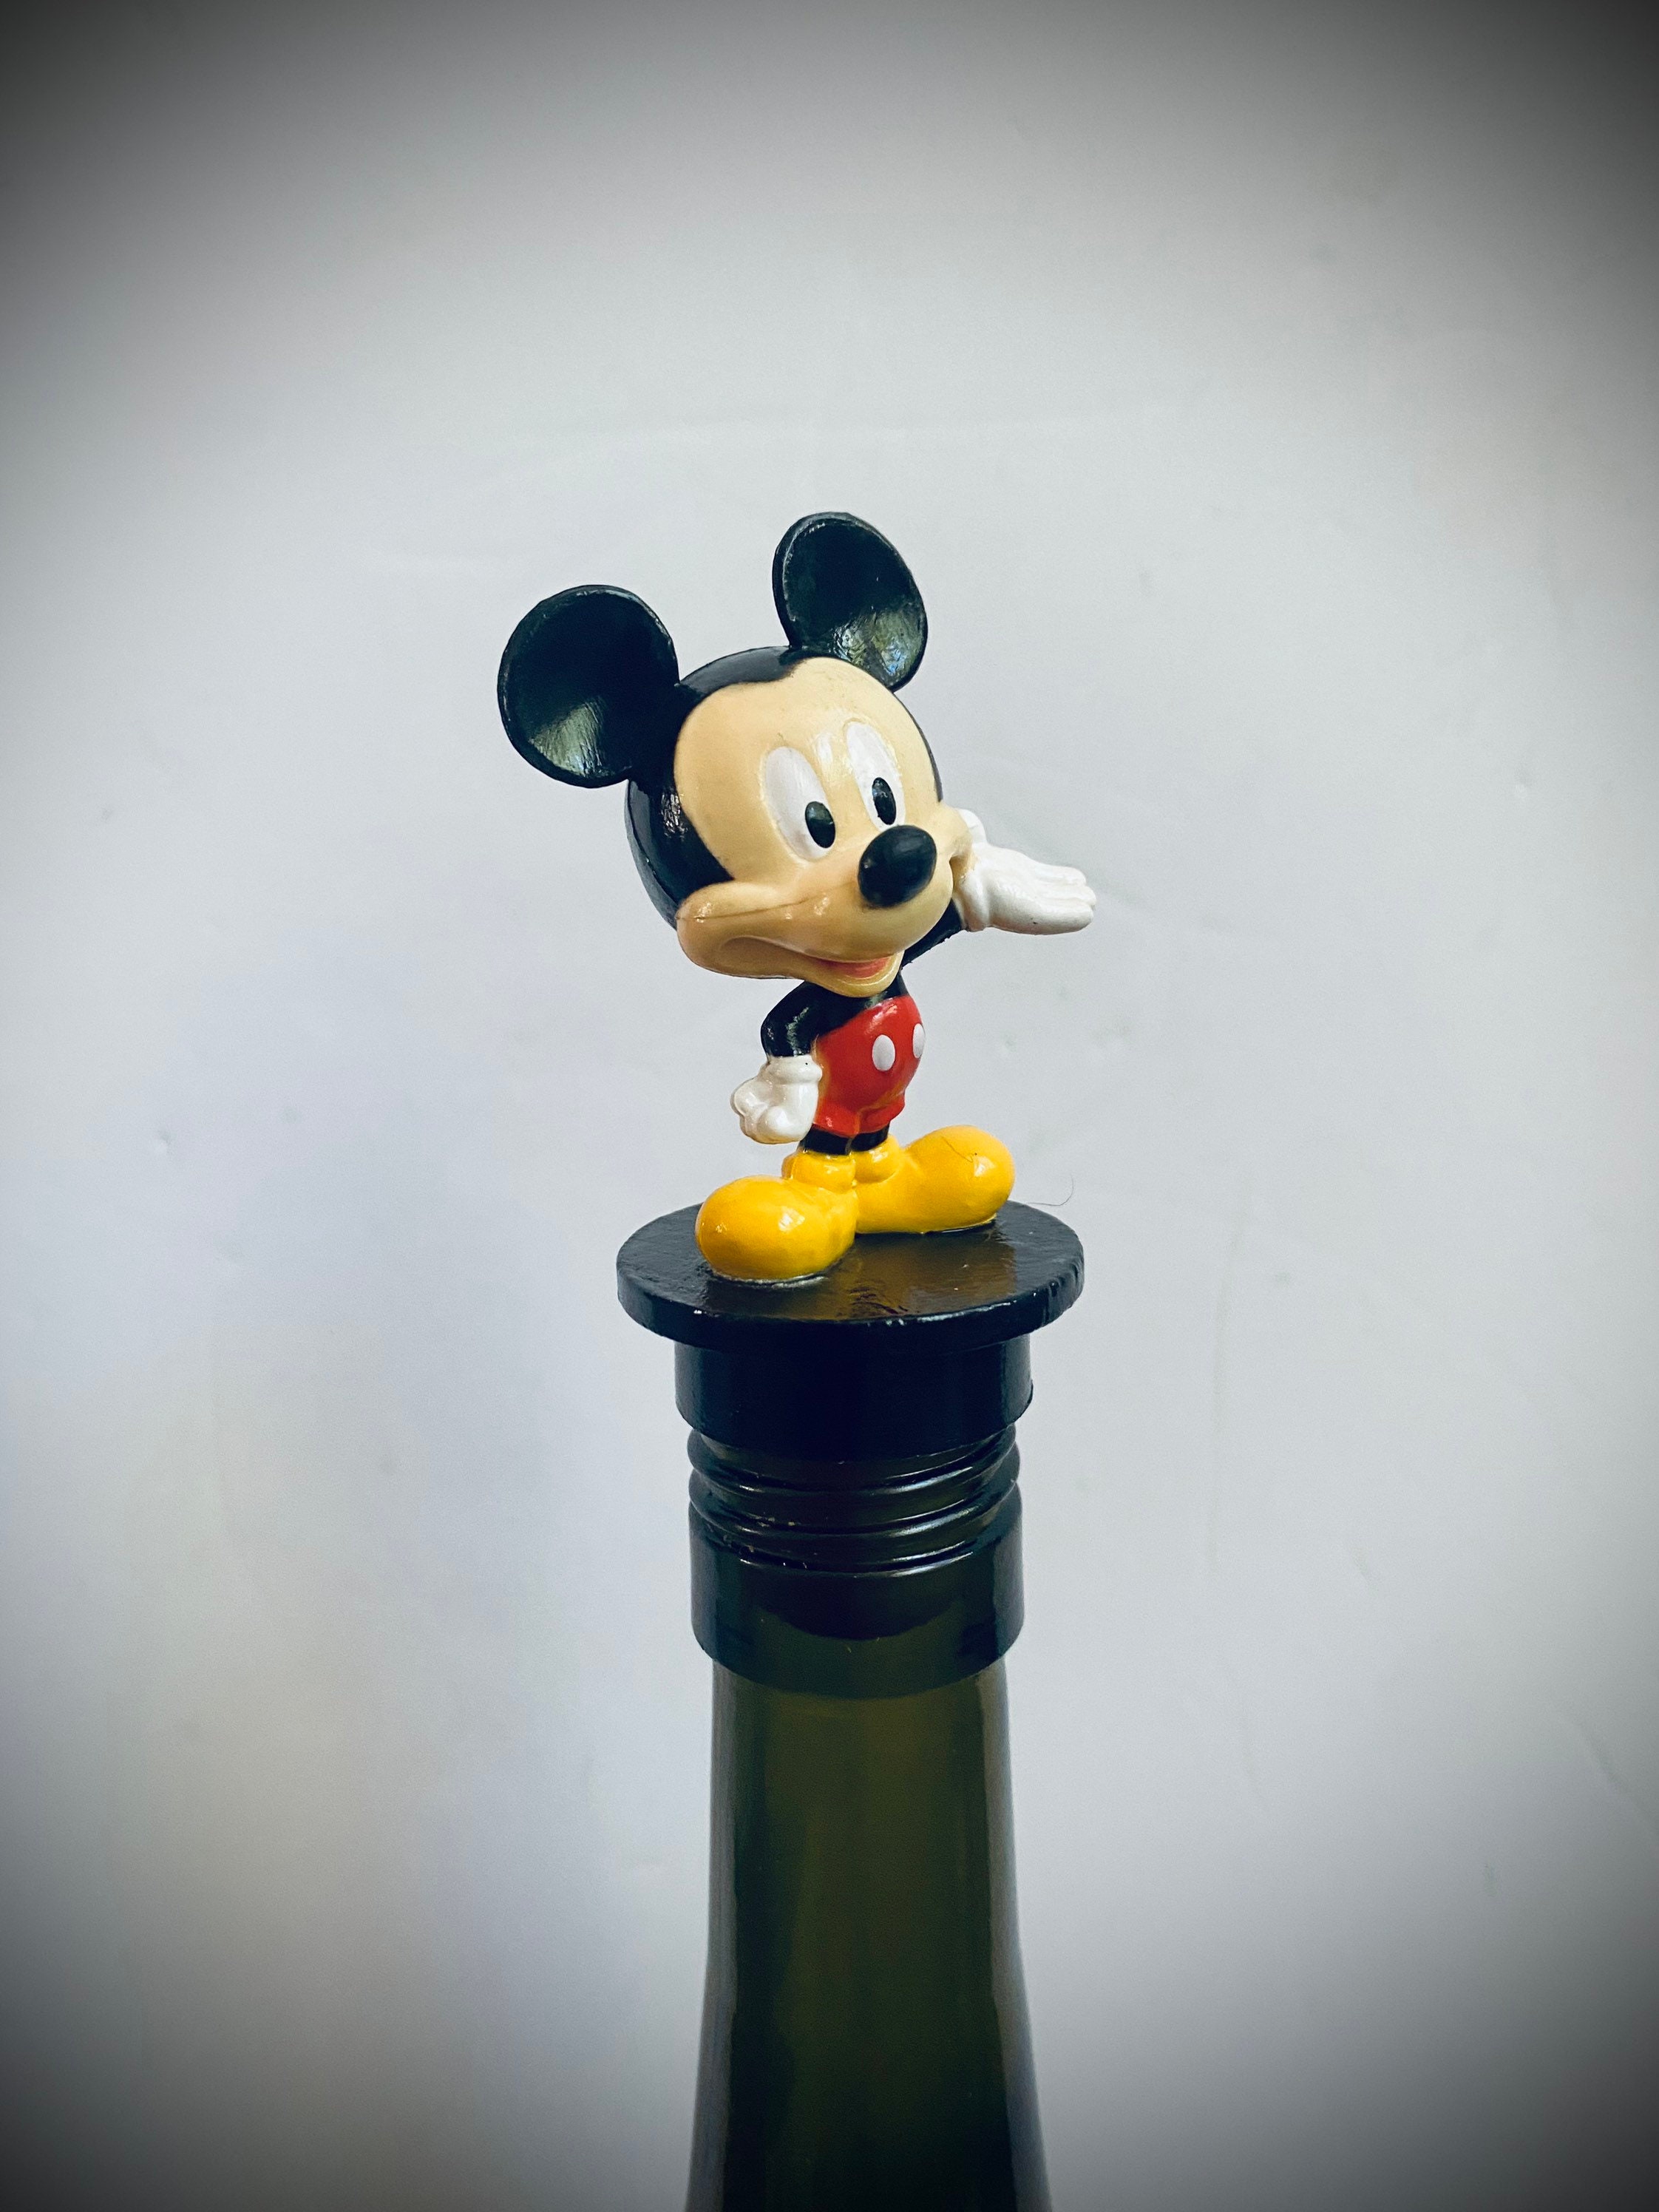 Mickey Mouse Can or Bottle Koozie